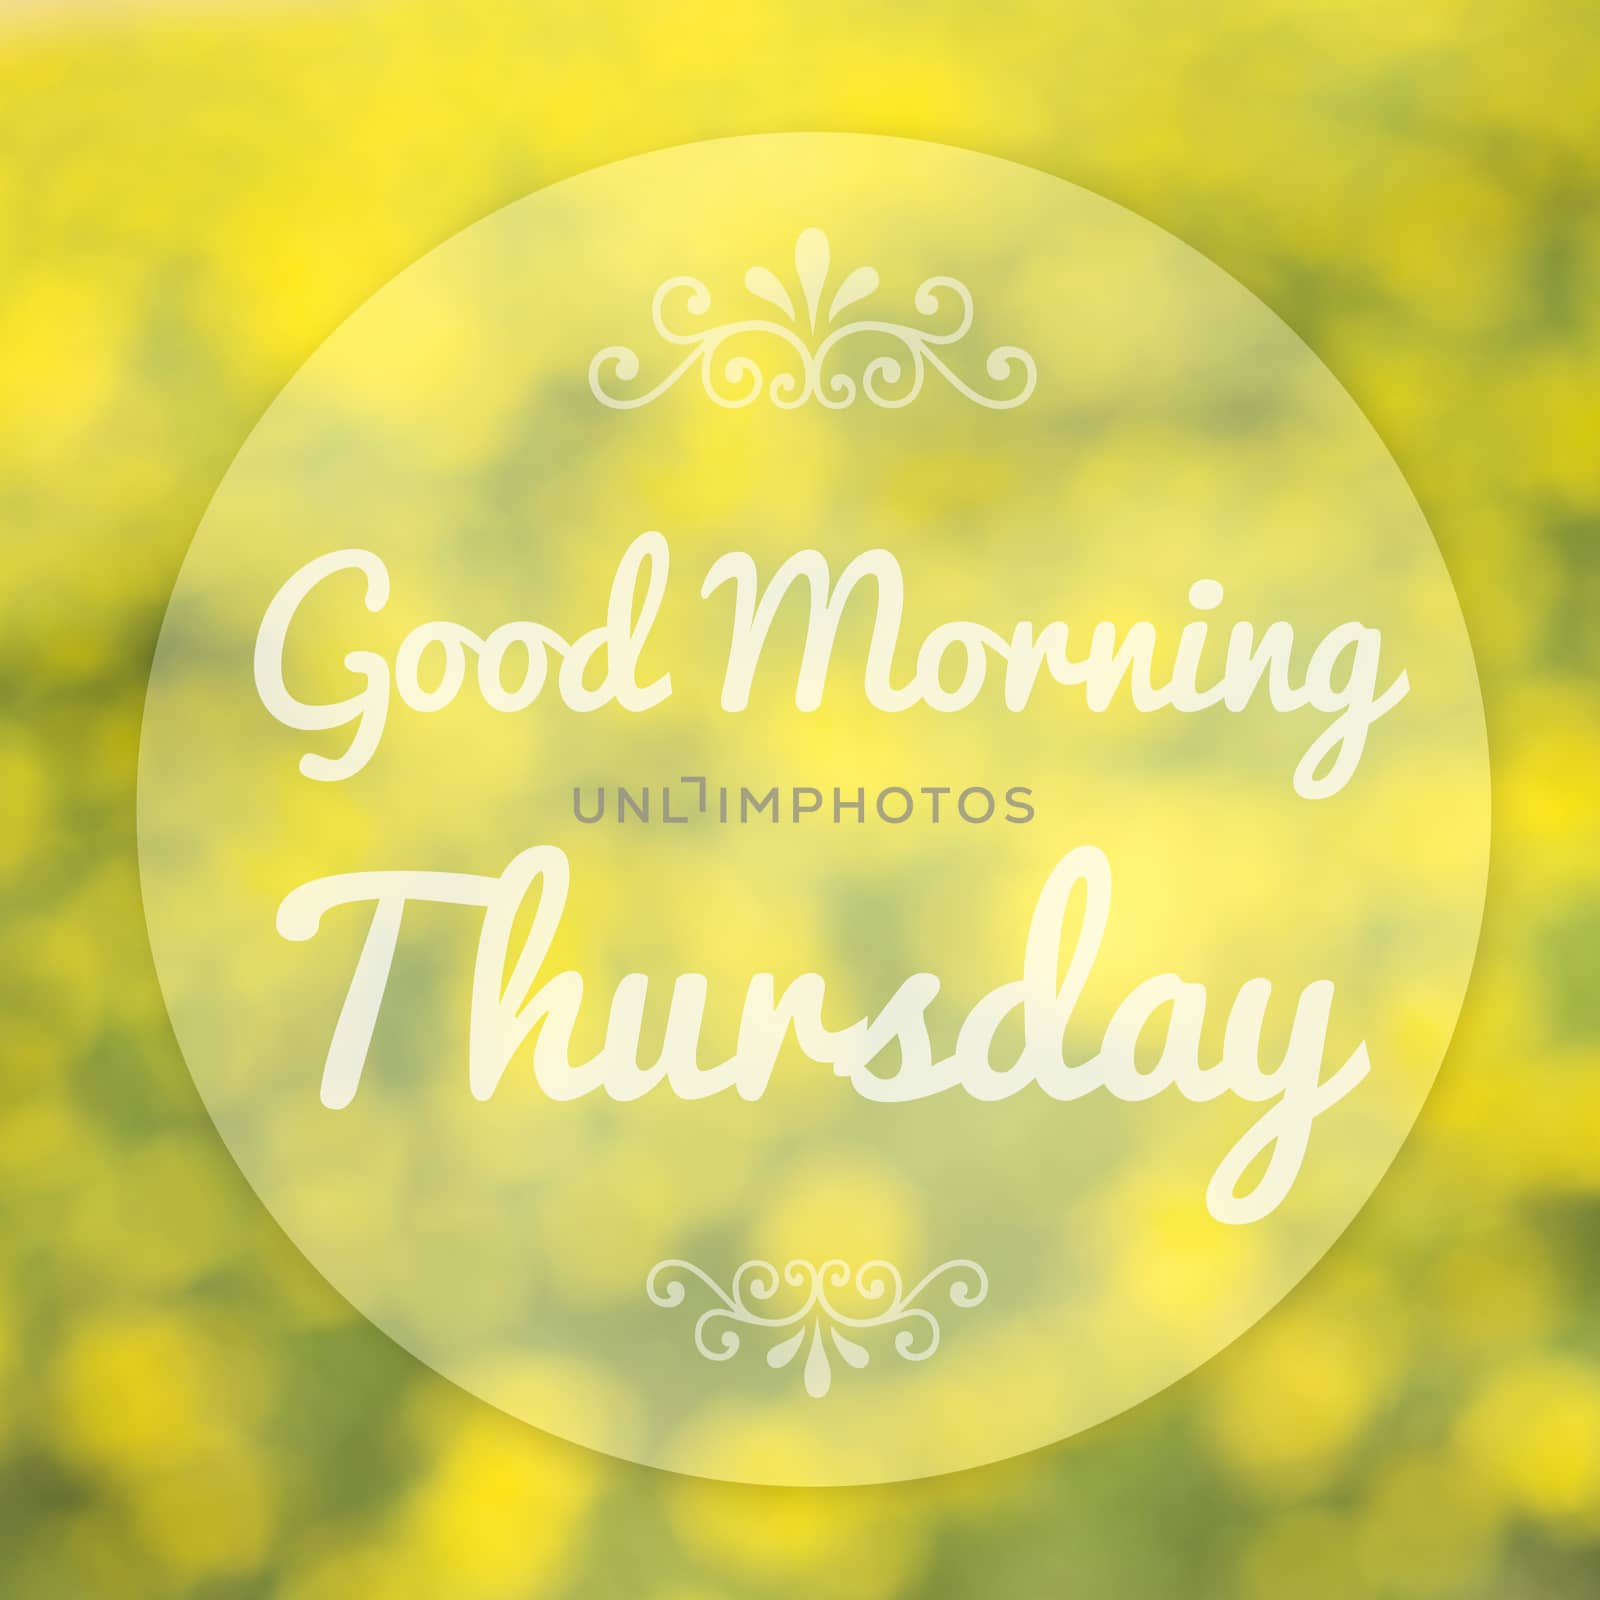 Good Morning Thursday on blur background by 2nix